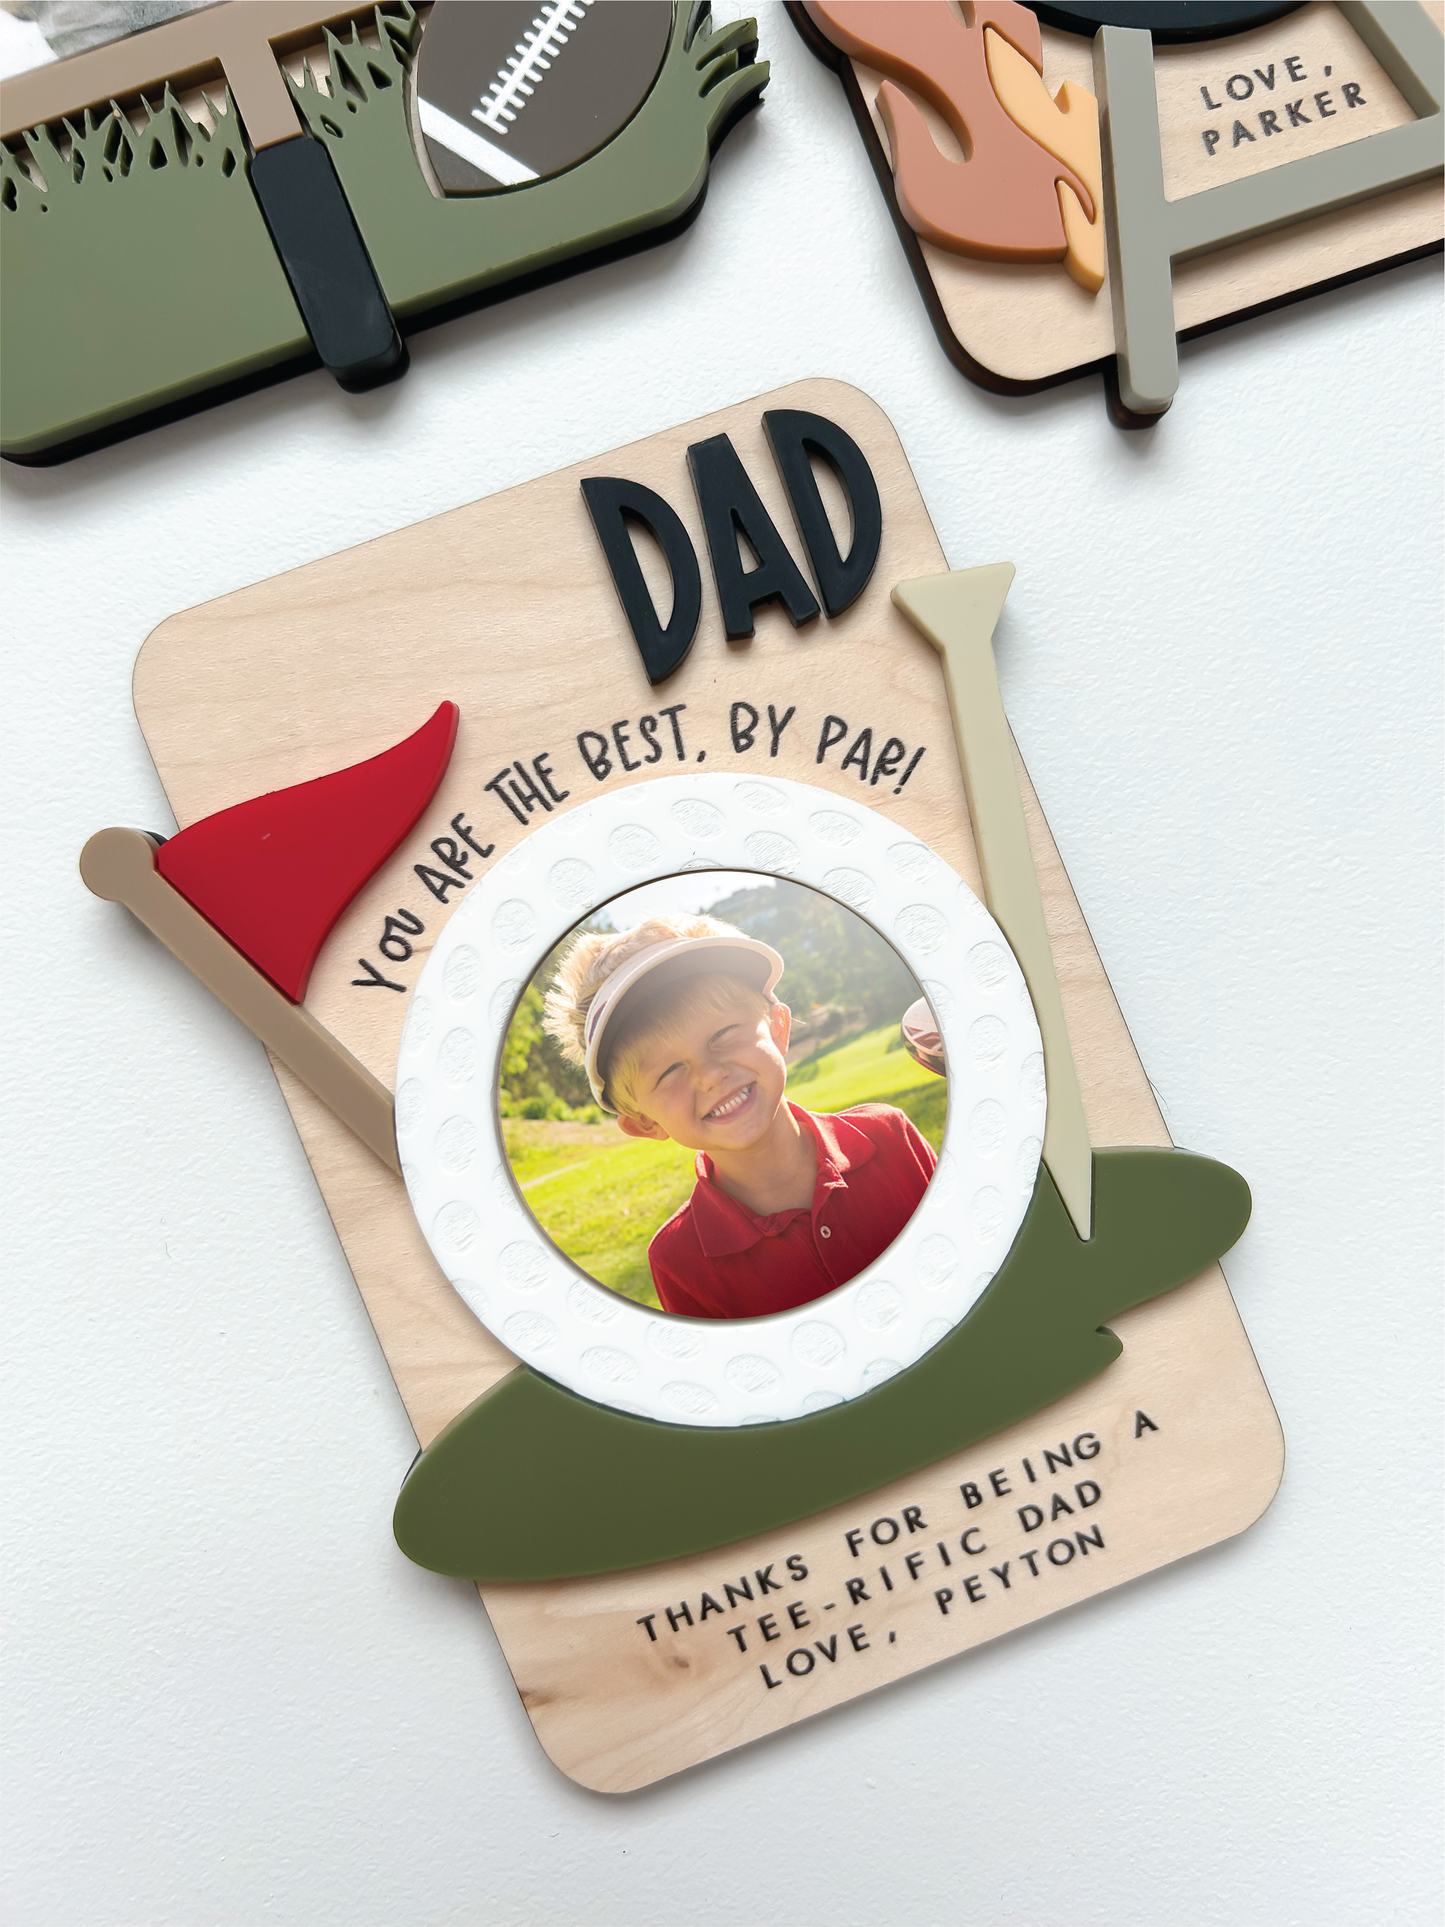 Custom Father's Day Golf Photo Magnet